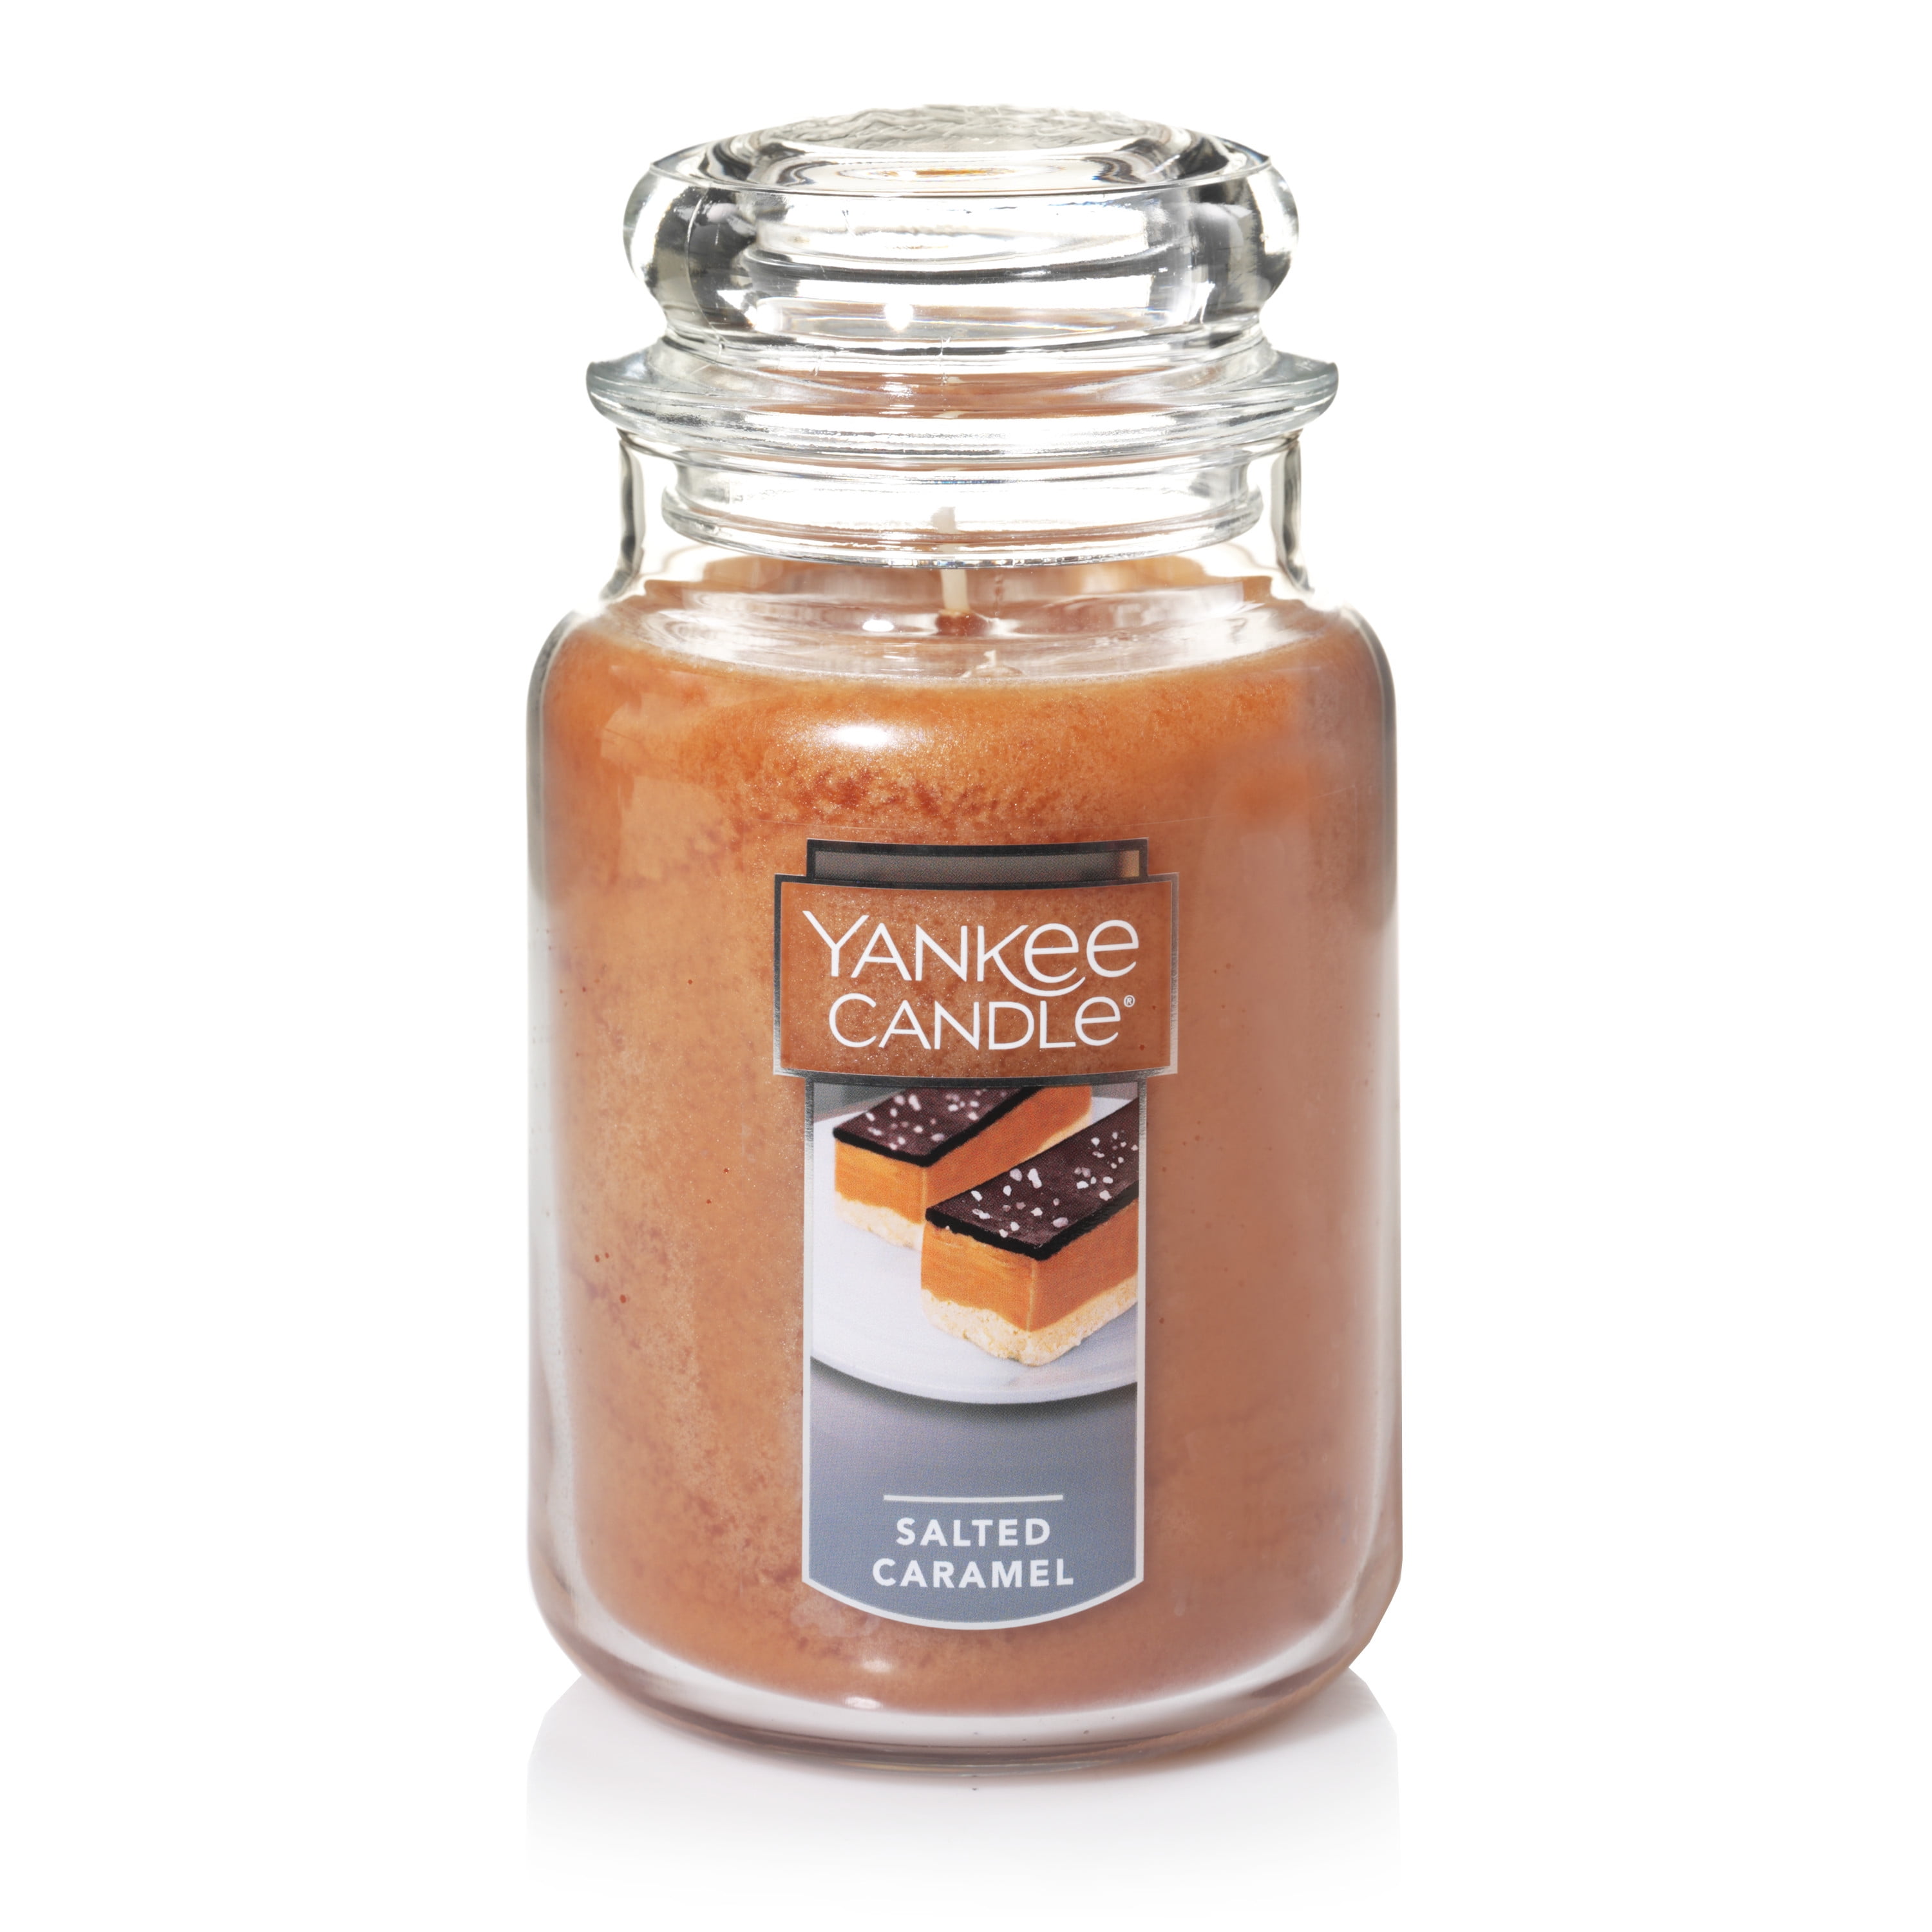 Candles Gift For Home Yankee Candle Original Large Jar Scented Candle 22 oz 